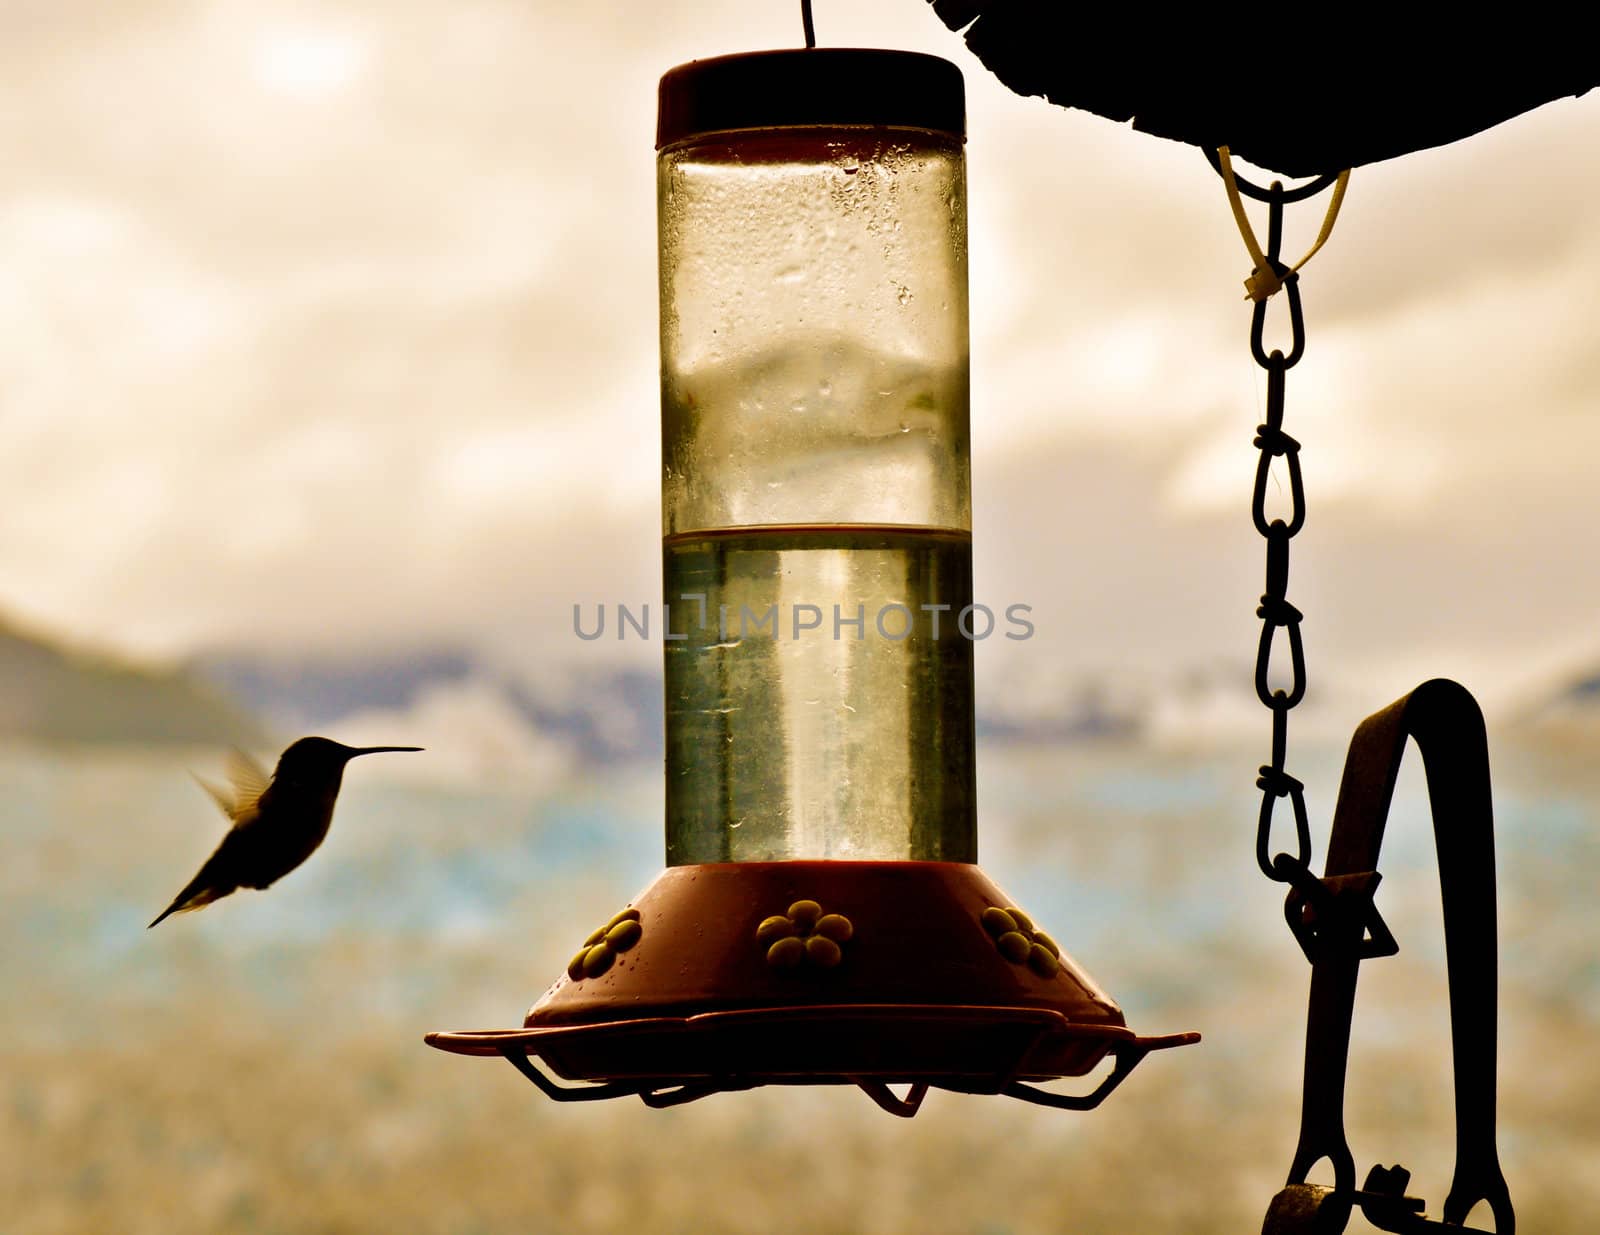 Hummingbird Approaches Feeder 3 by RefocusPhoto